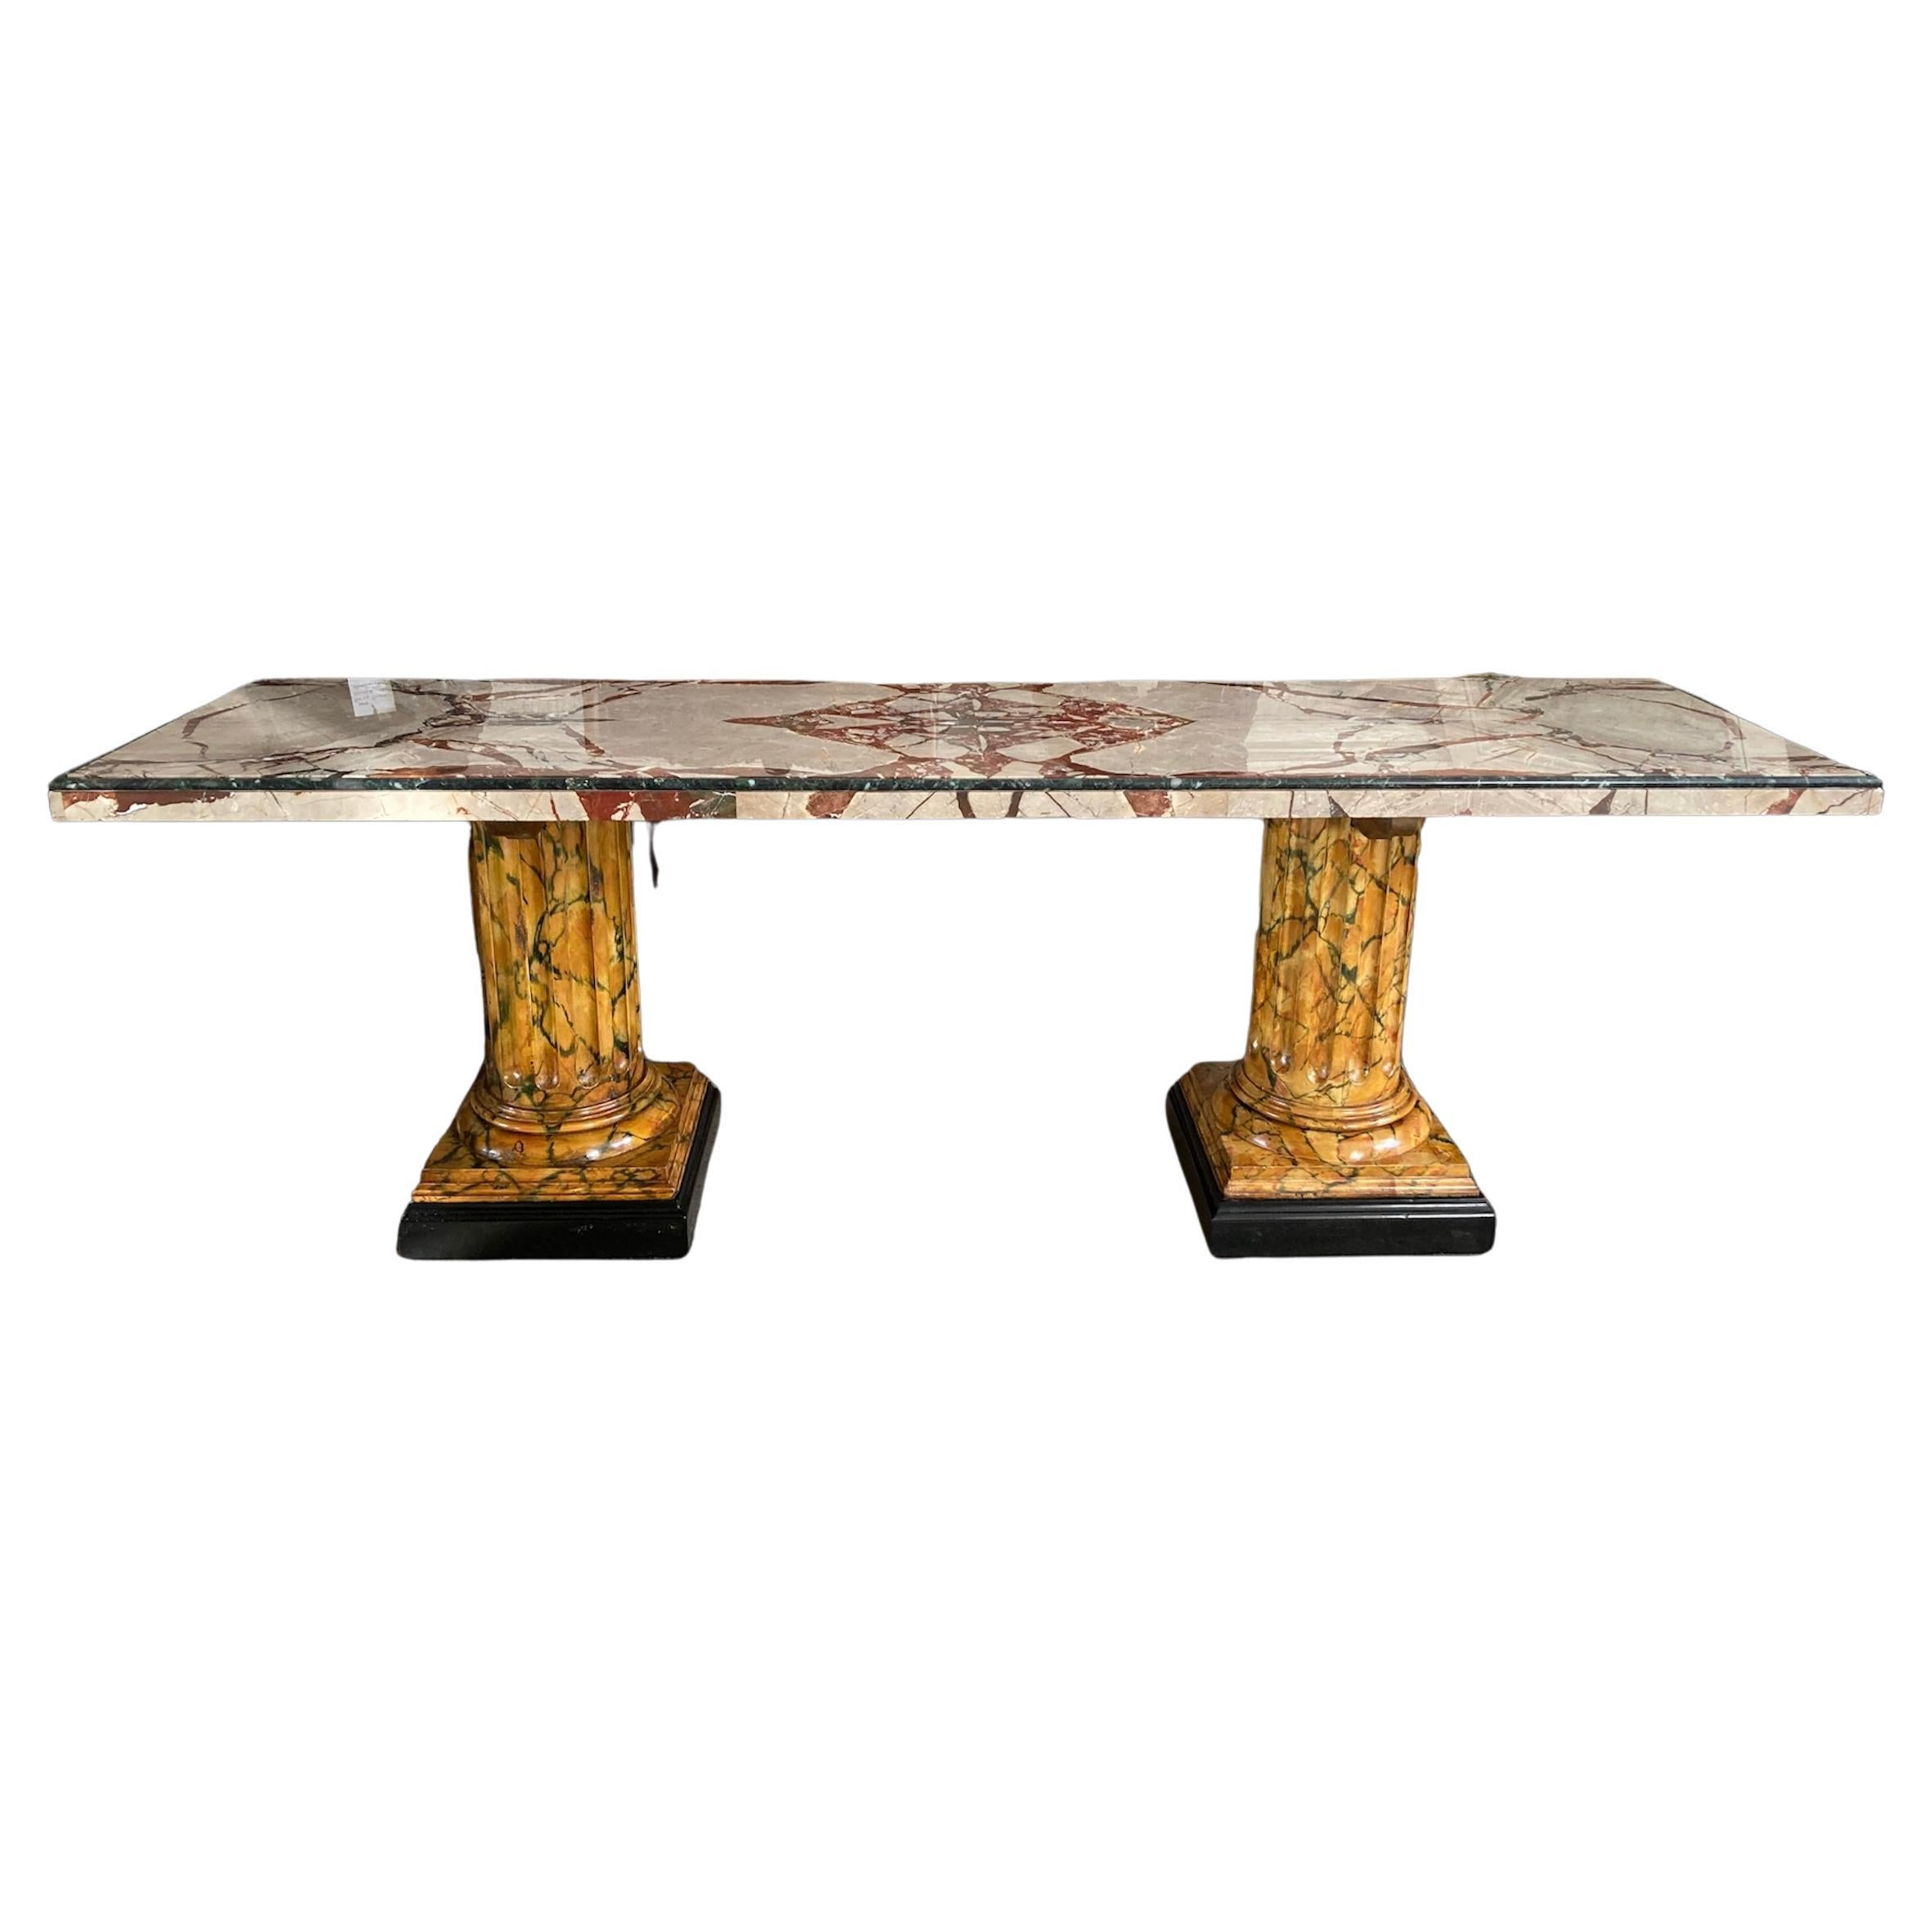 Striking 19th C Marble Top Coffee Table For Sale